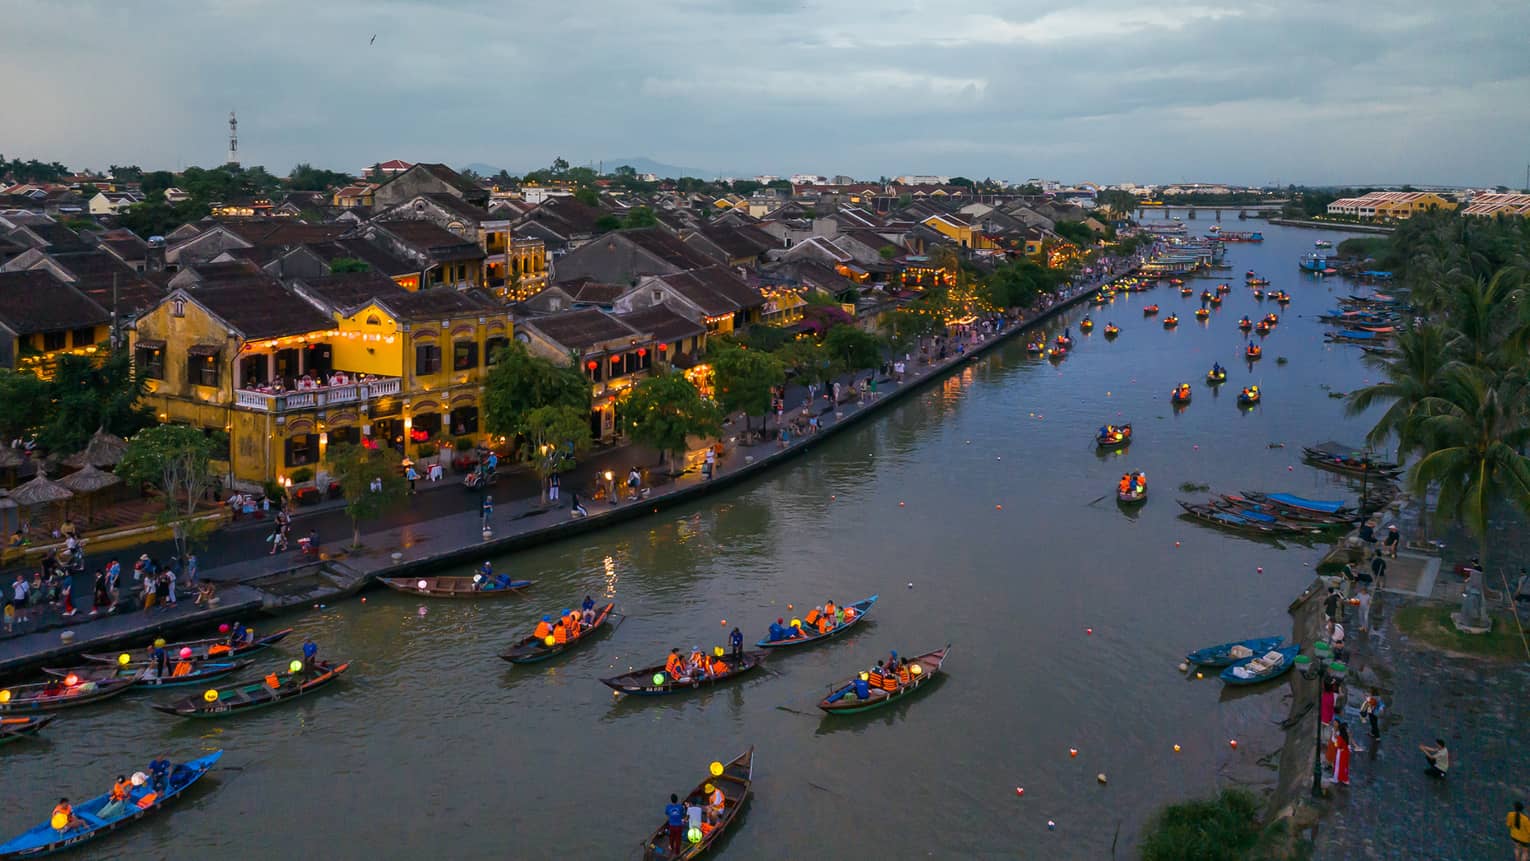 At dusk, lantern-lit canoes navigate past yellow buildings lit with red-and-yellow lanterns, along a bustling shoreline.